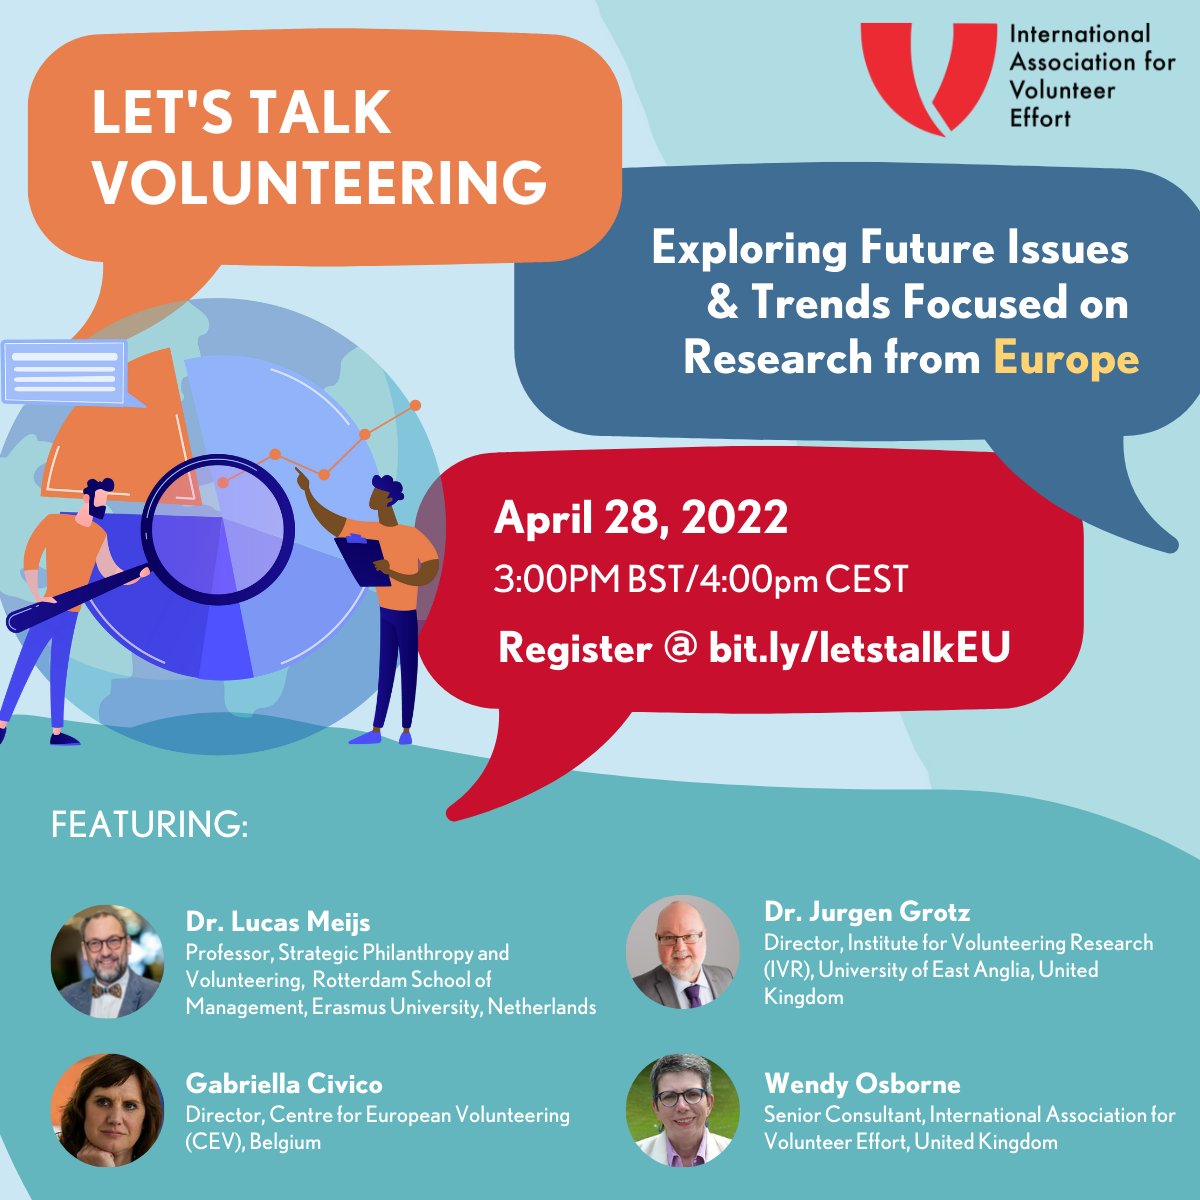 Volunteering research about isssues and trends in Europe. Join the free webinar organised by @IAVE with excellent speakers @g_civico @LucasMeijs @WendyOsborne9 @JurgenGrotz To learn more and register to attend, please visit bit.ly/letstalkEU. @uniofeastanglia